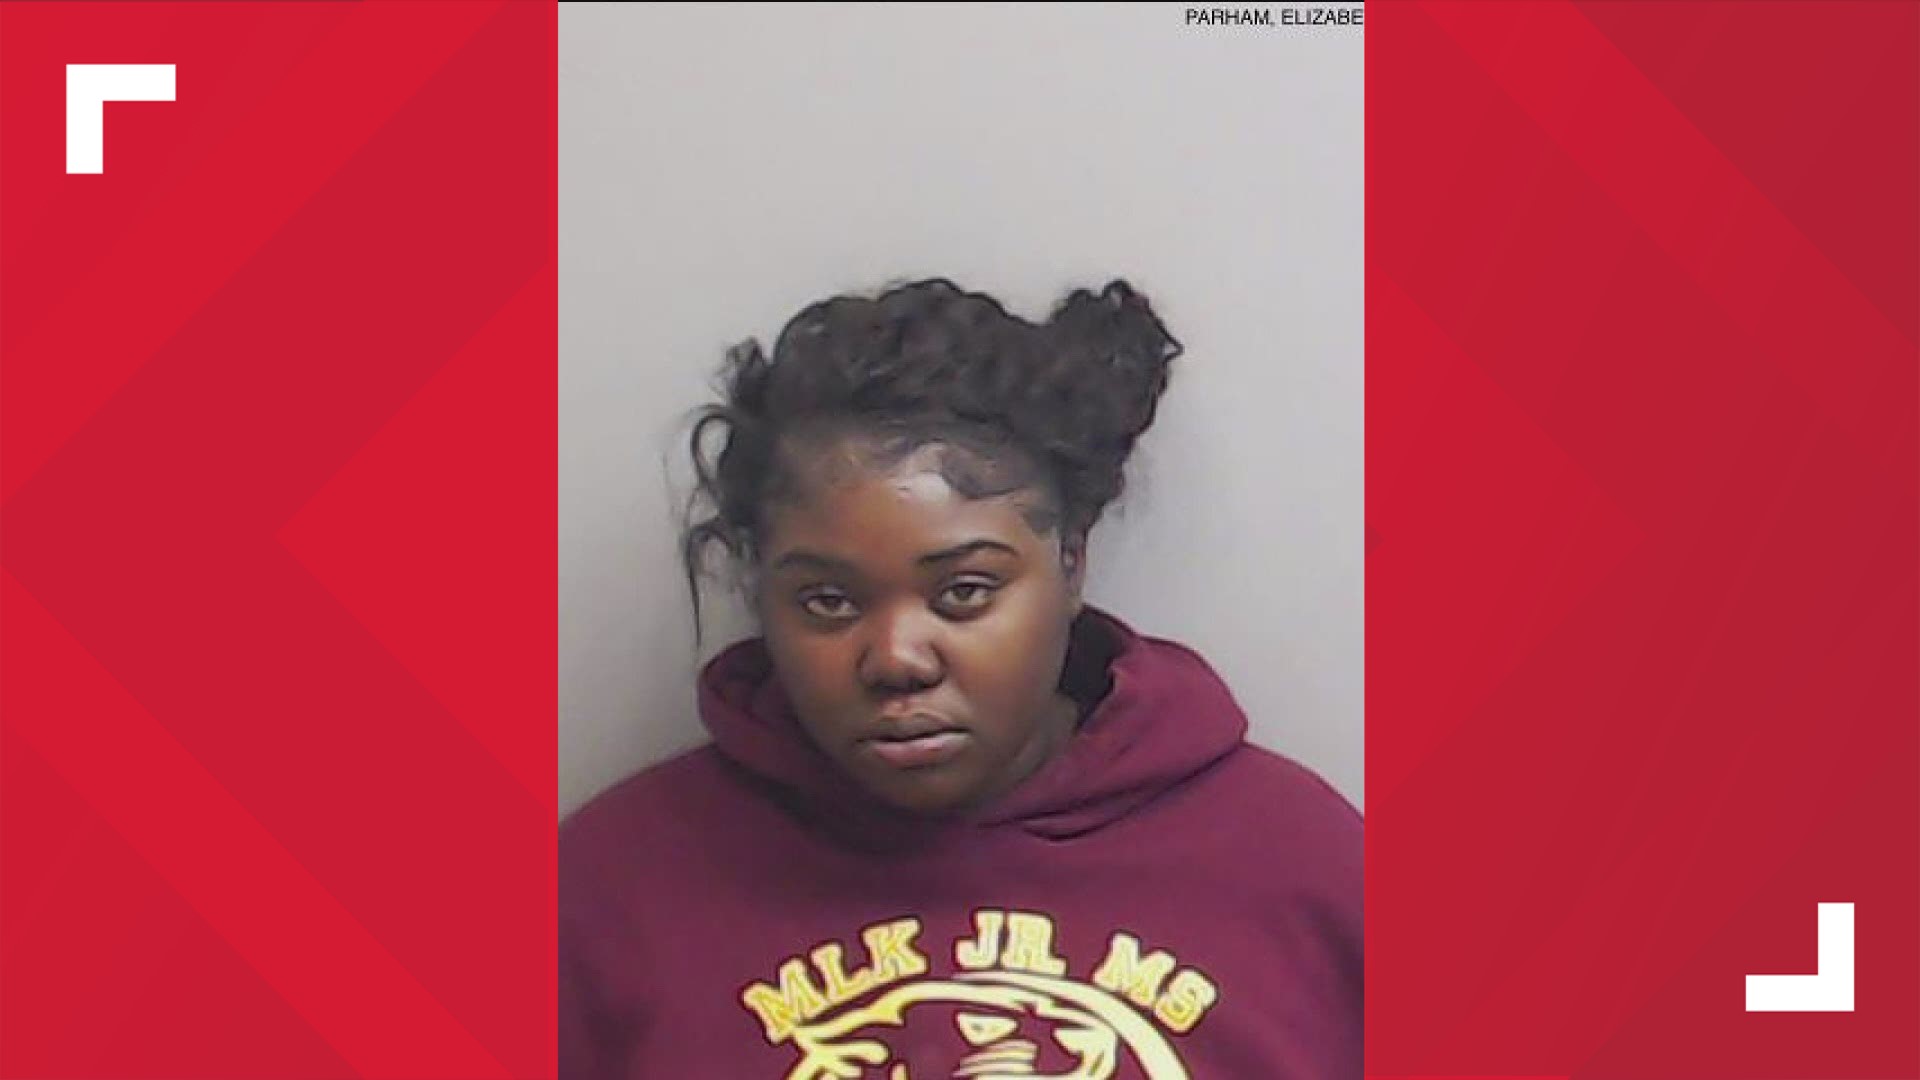 Police said Elizabeth Parham is charged with multiple charges that including being a party to the crime of felony murder.